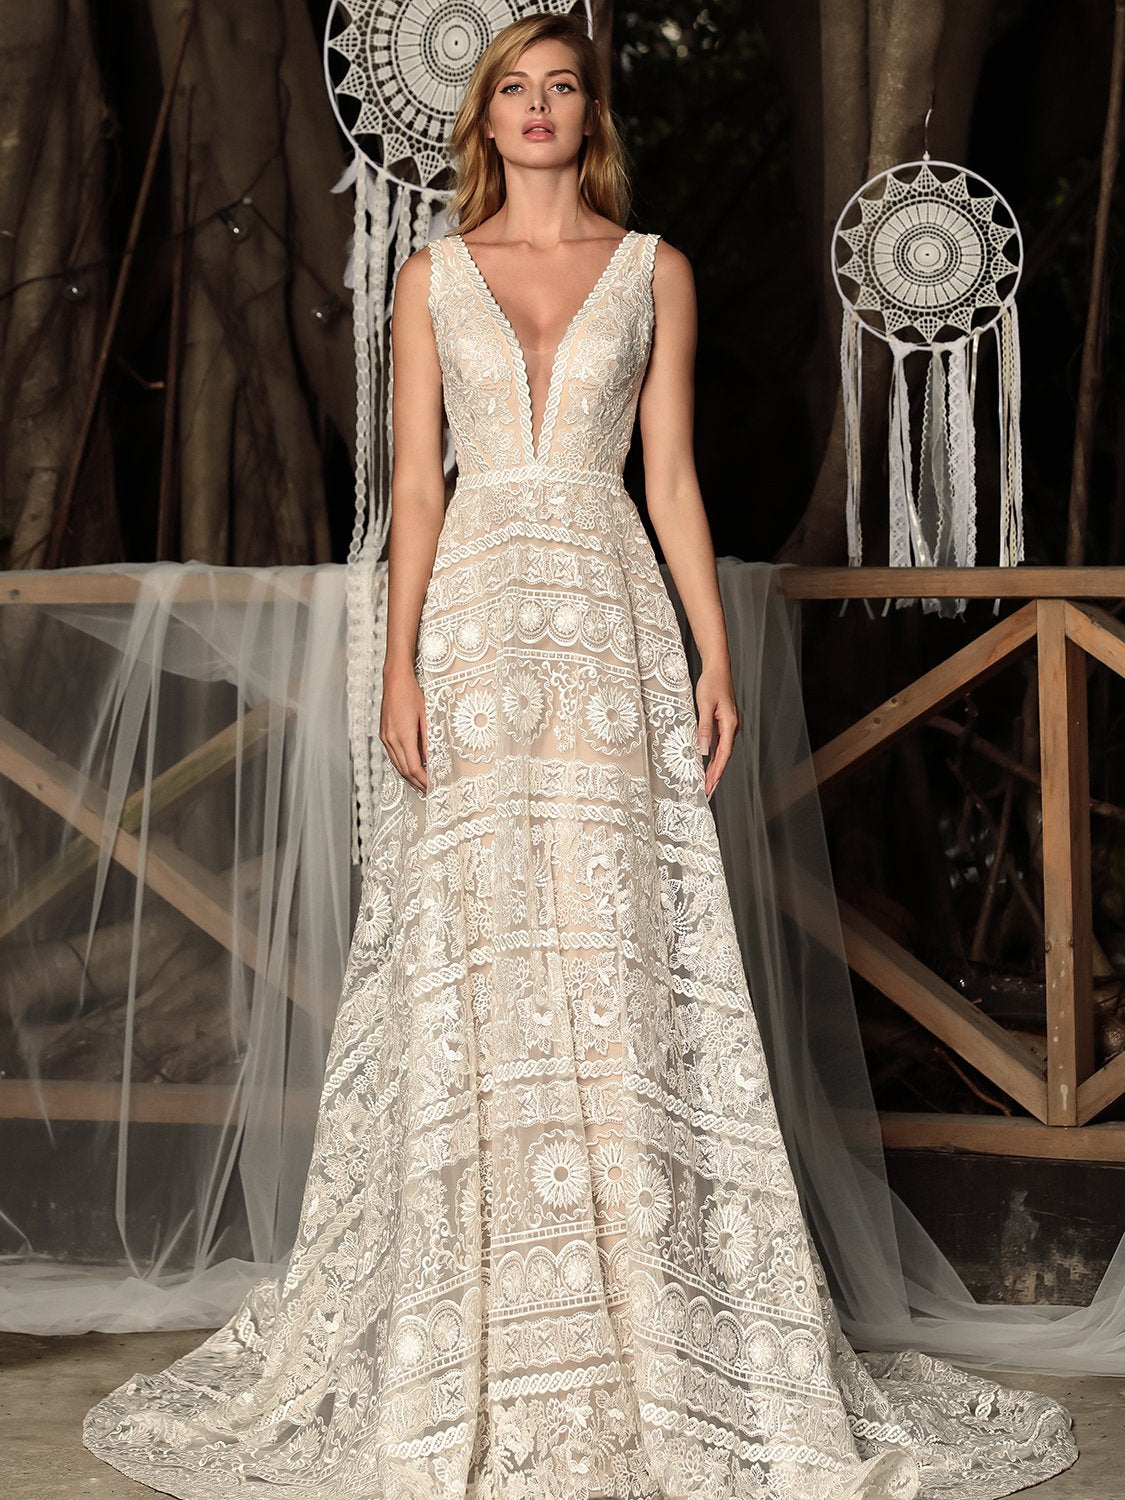 Cora - Sample Gown, Online Sample Sale - 1800, Chic Nostalgia - Sample Gown - Eternal Bridal